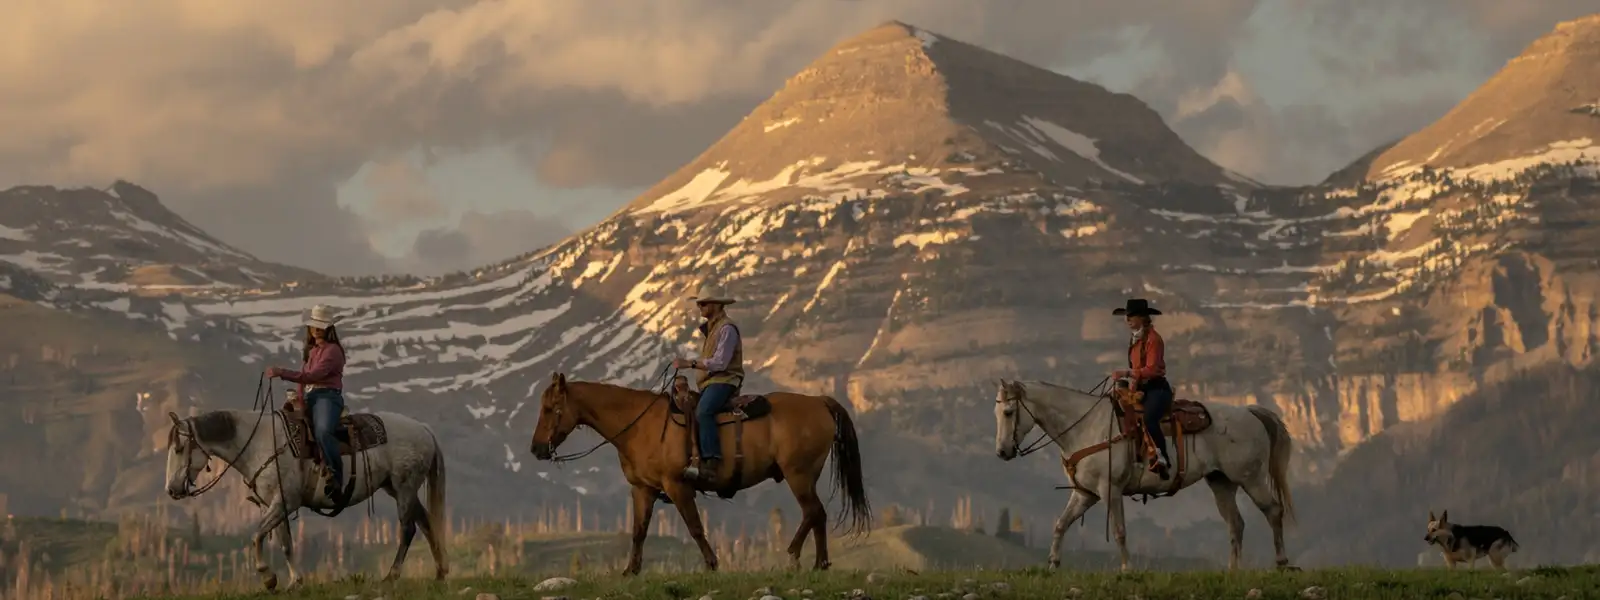 Three people riding on horseback as their dog follows in the Gros Ventre wilderness.